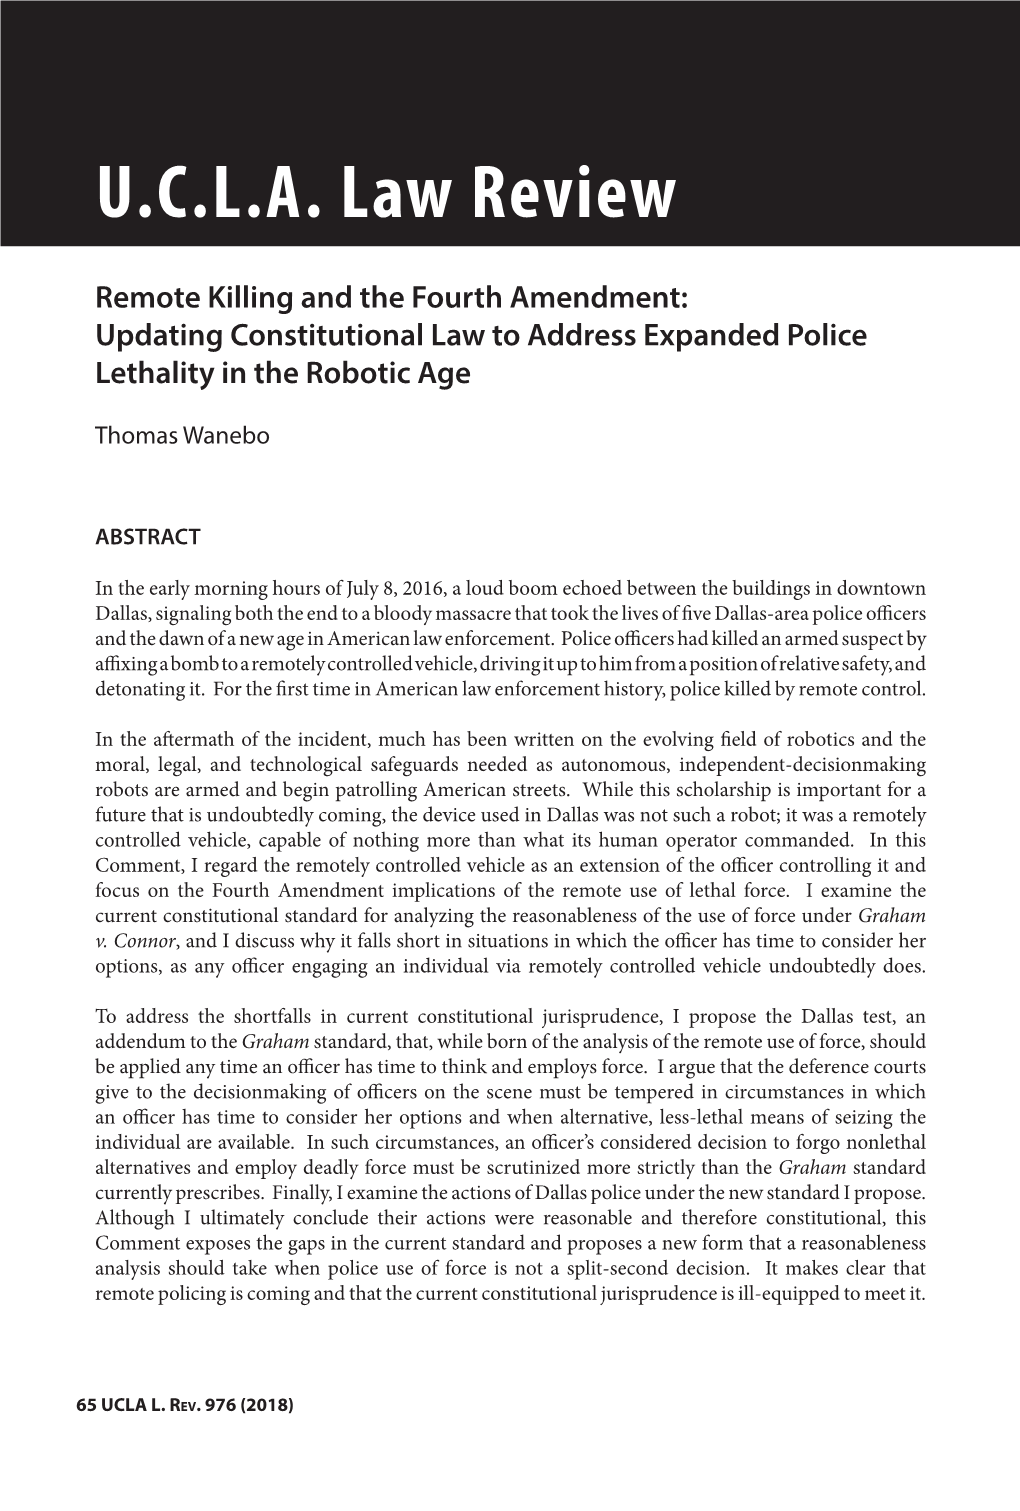 Updating Constitutional Law to Address Expanded Police Lethality in the Robotic Age